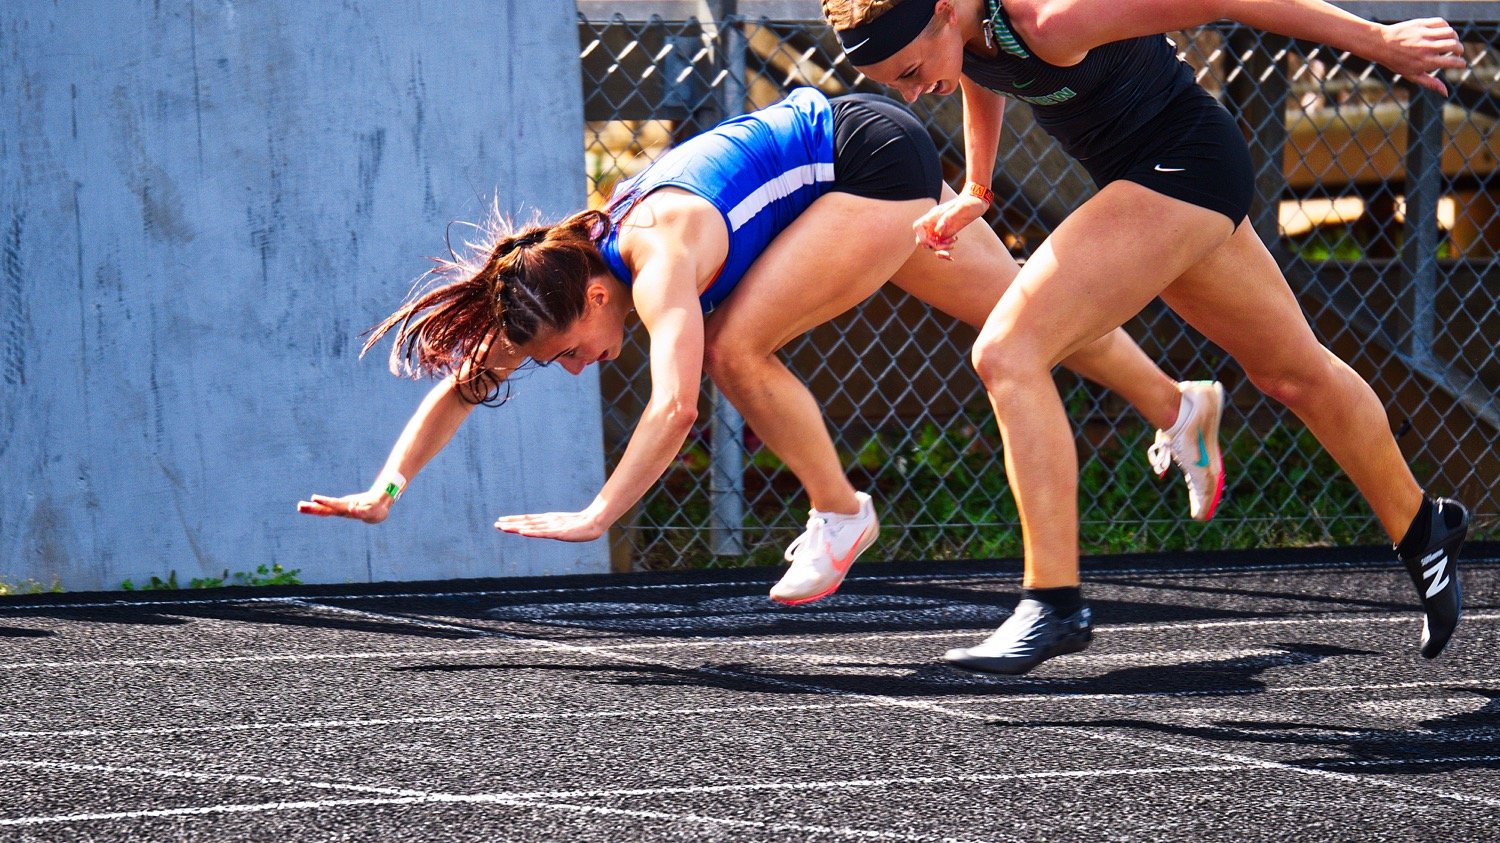 Quitman hurdler Brooklyn Marcee dives over the finish line to edge out Valley View's Rylee Gattenby for second place by one one-hundredth of a second in the 300 meter hurdles at region April 24, earning a trip to Austin. [see more sports from throughout the year]